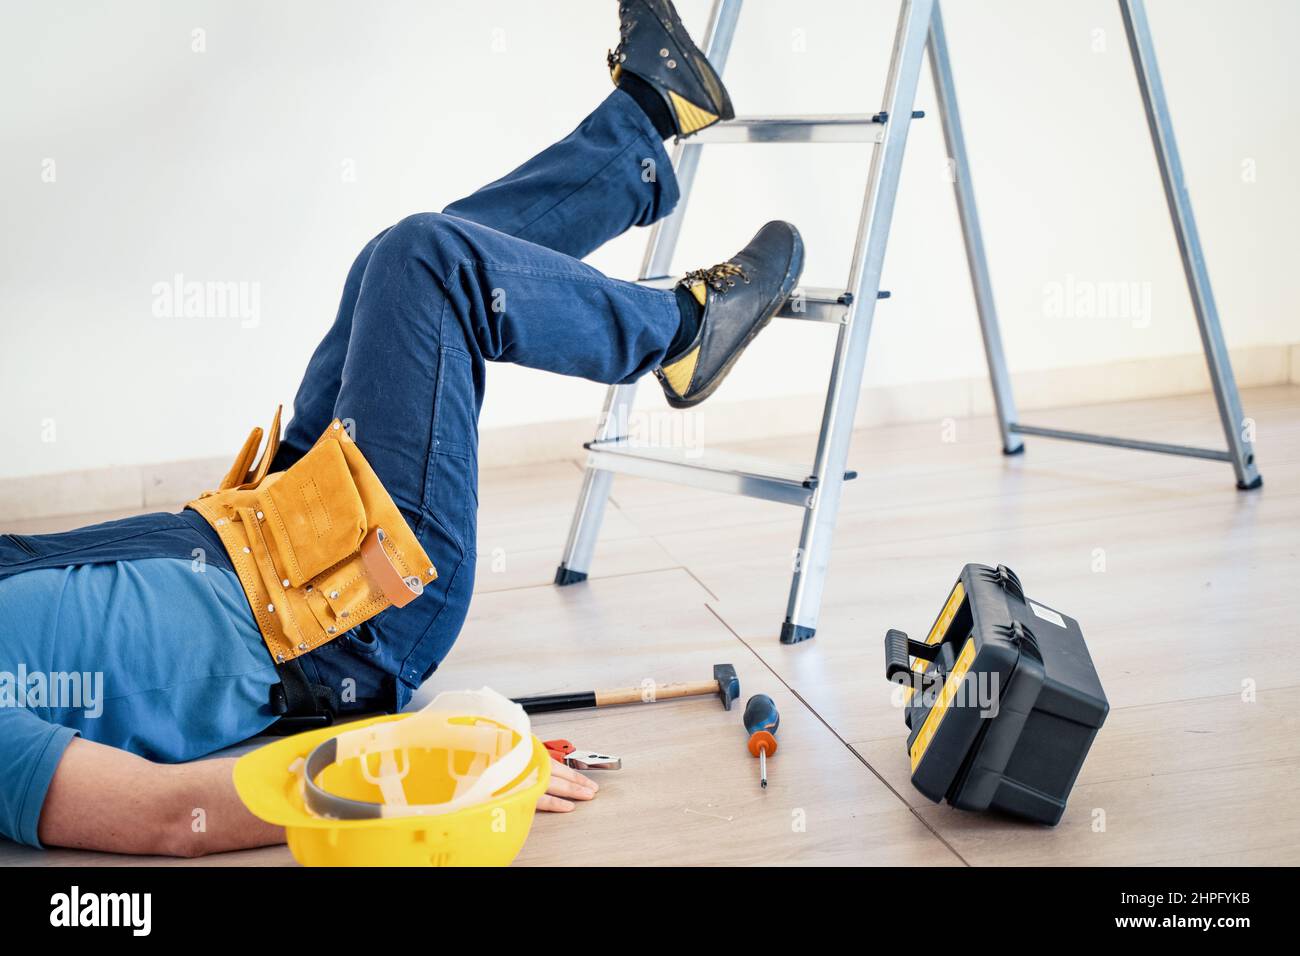 Safety rules in construction site concept, worker injured at work Stock Photo